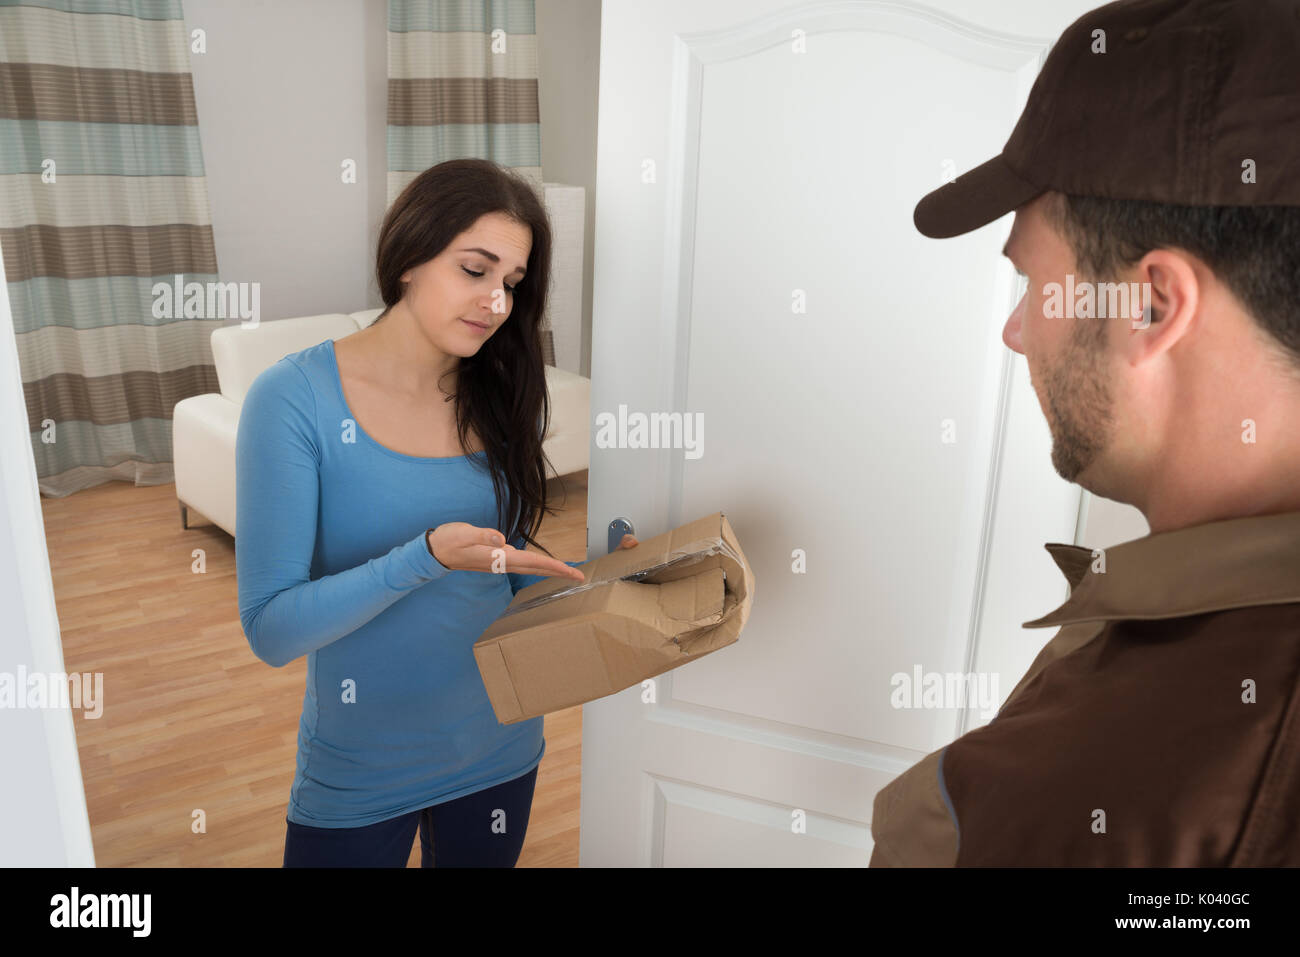 Woman Shouting On Delivery Man For Damaged Package At Doorway Stock Photo